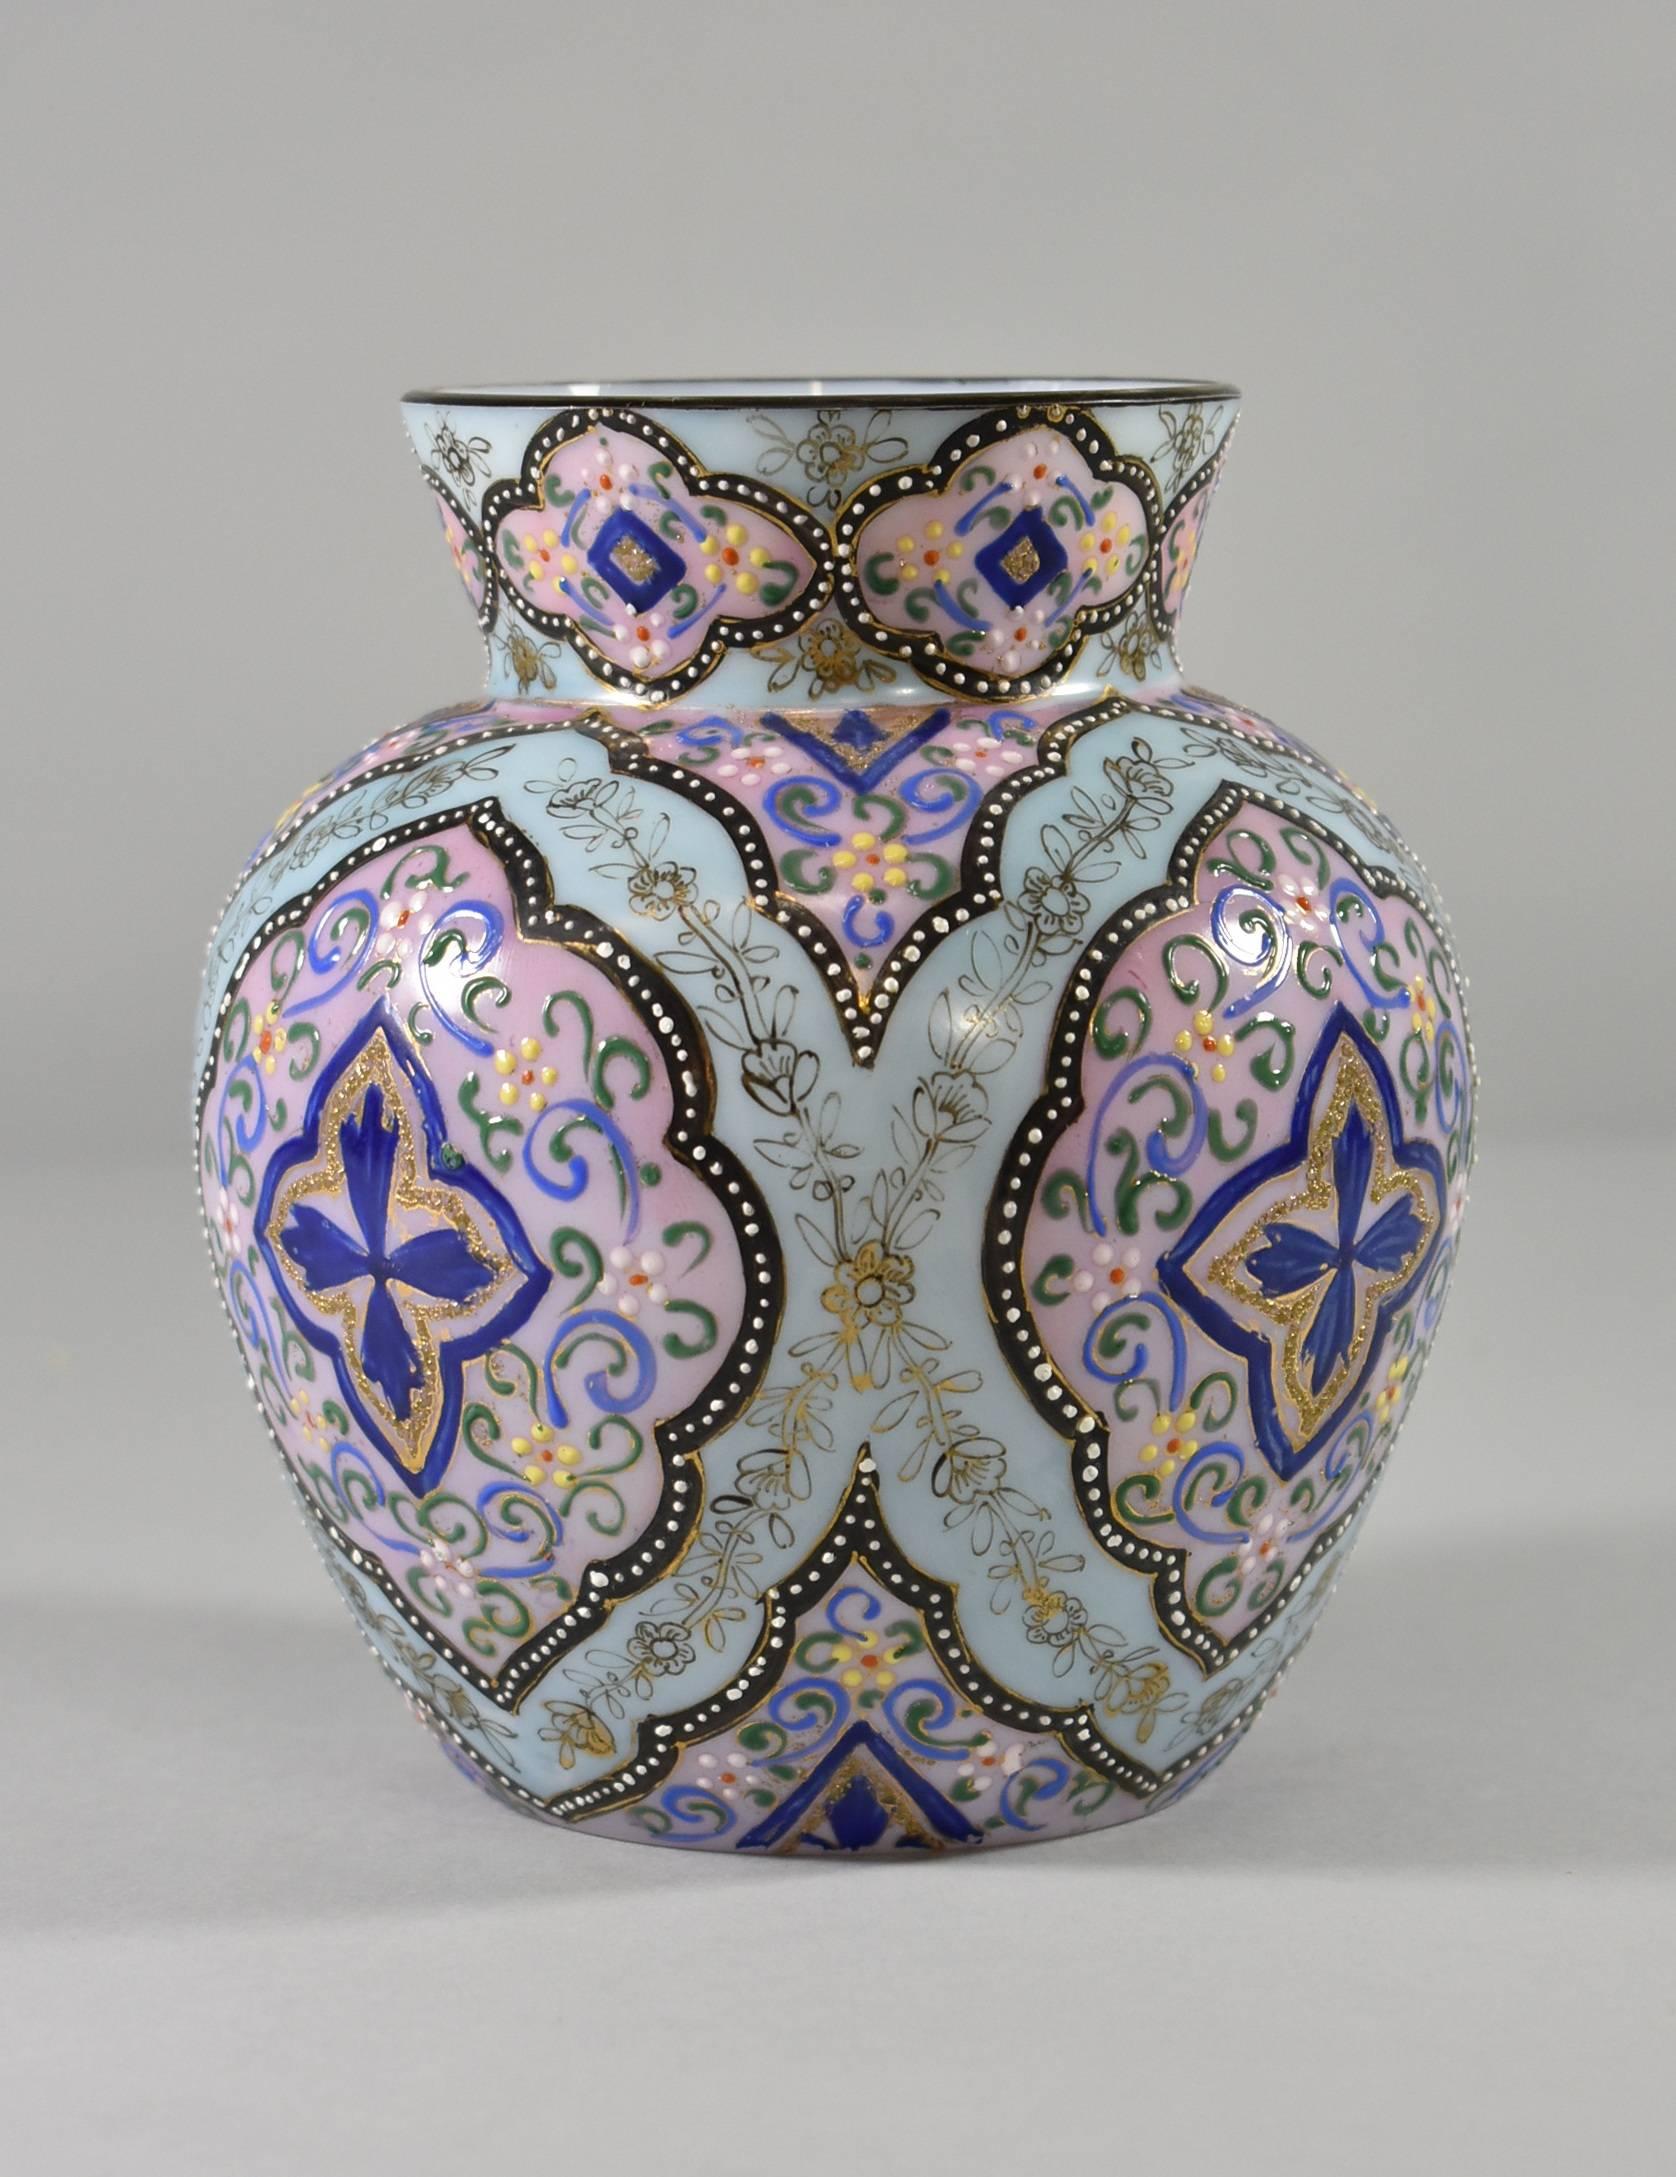 A beautiful art glass web in the Moroccan pattern by Webb. Measures: Vase is 6.5" tall and 3.25" in diameter. An aqua and rose background is accented with gold blue, black and green enamel work. Signed on the base.